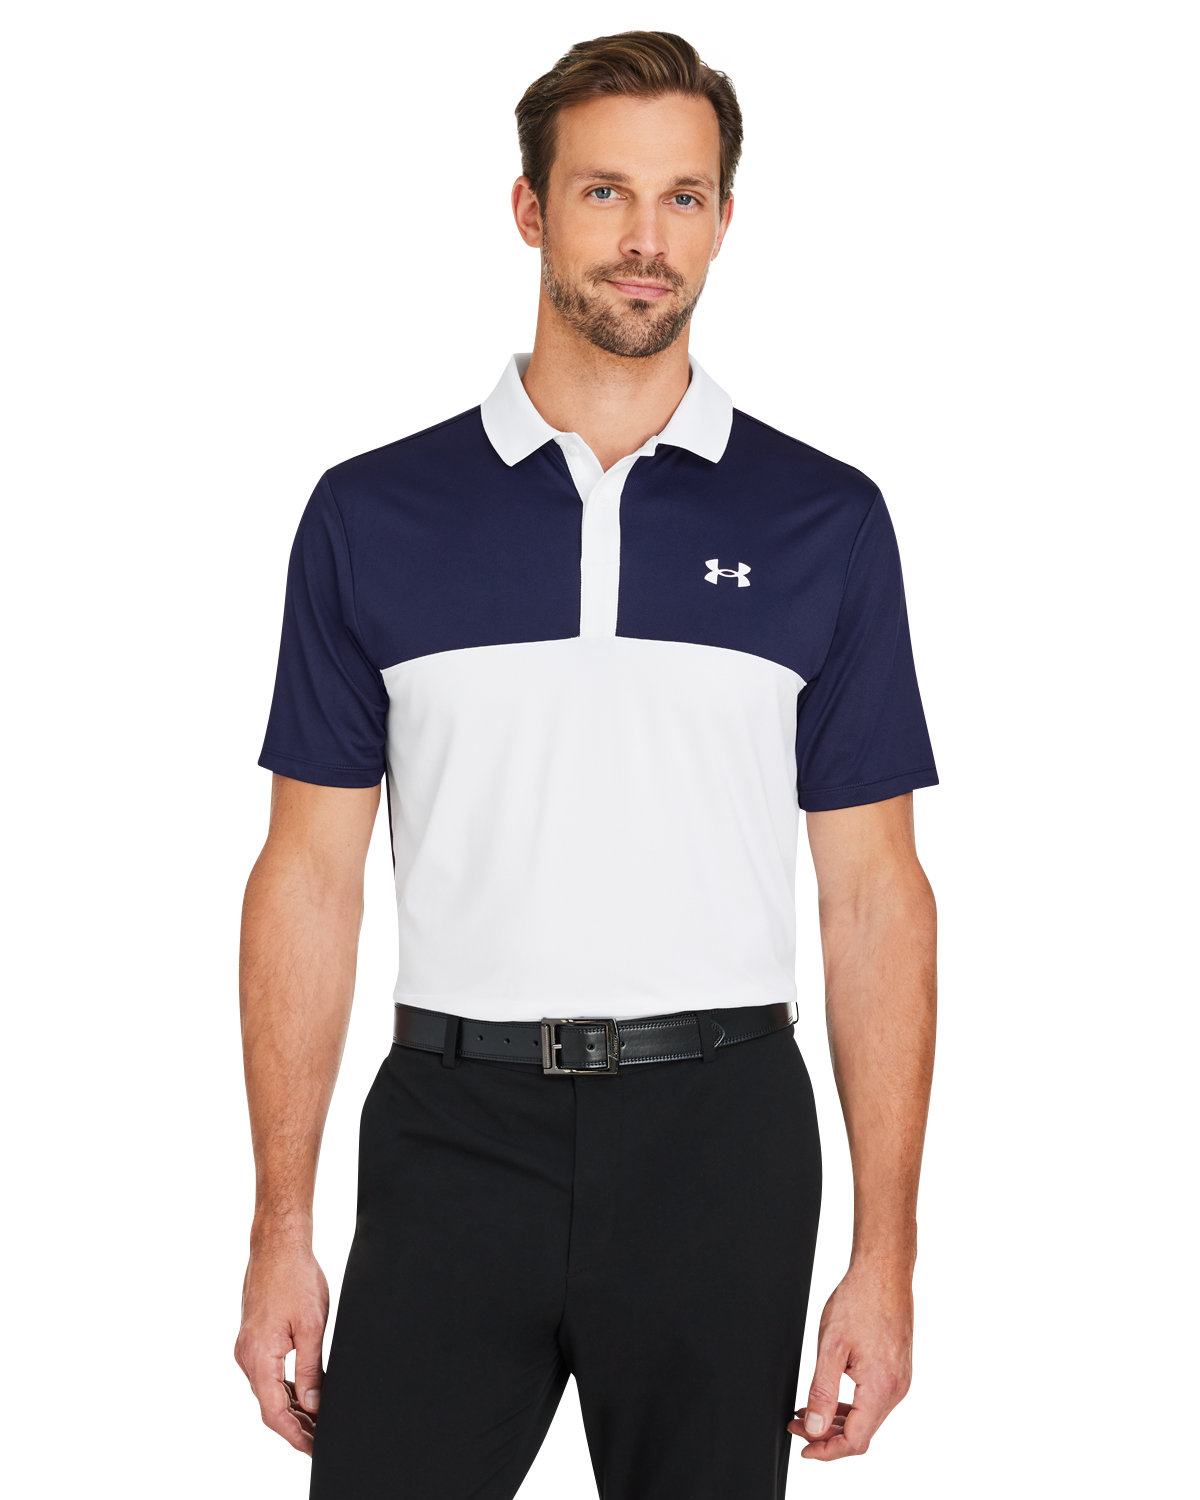 Mens Performance 3&#46;0 Colorblock Polo-Under Armour